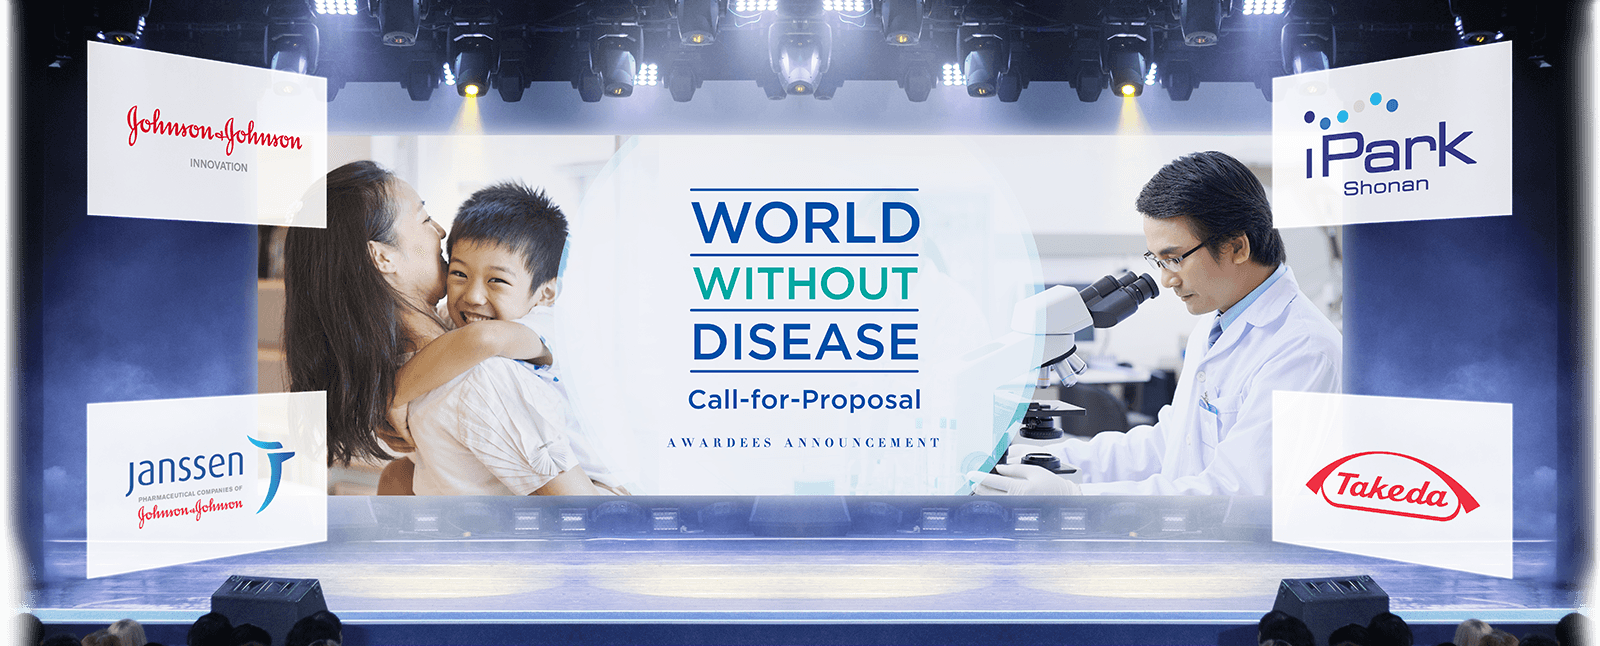 WORLD WITHOUT DISEASE Call-for-Proposal WINNERS ANNOUNCEMENT